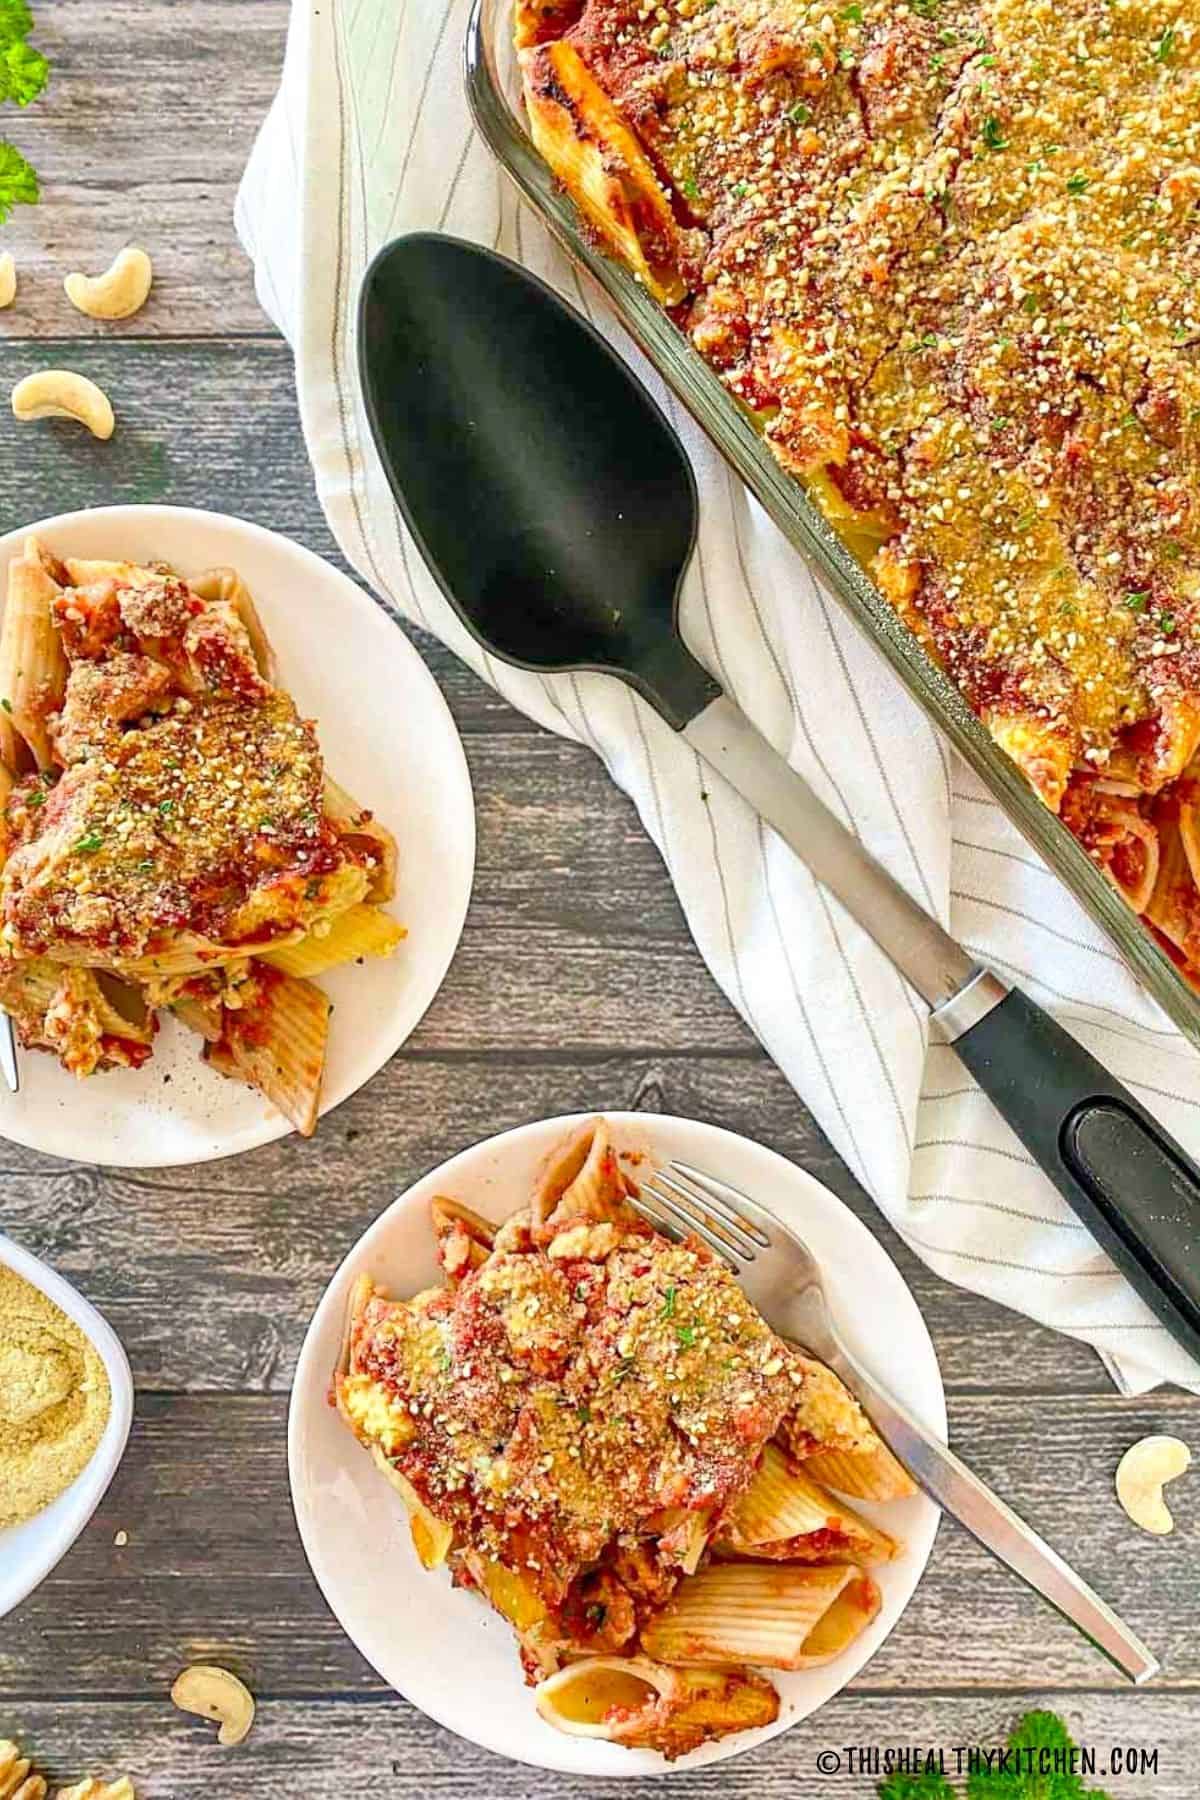 Two plates of baked pasta with vegan ricotta and tray beside them.